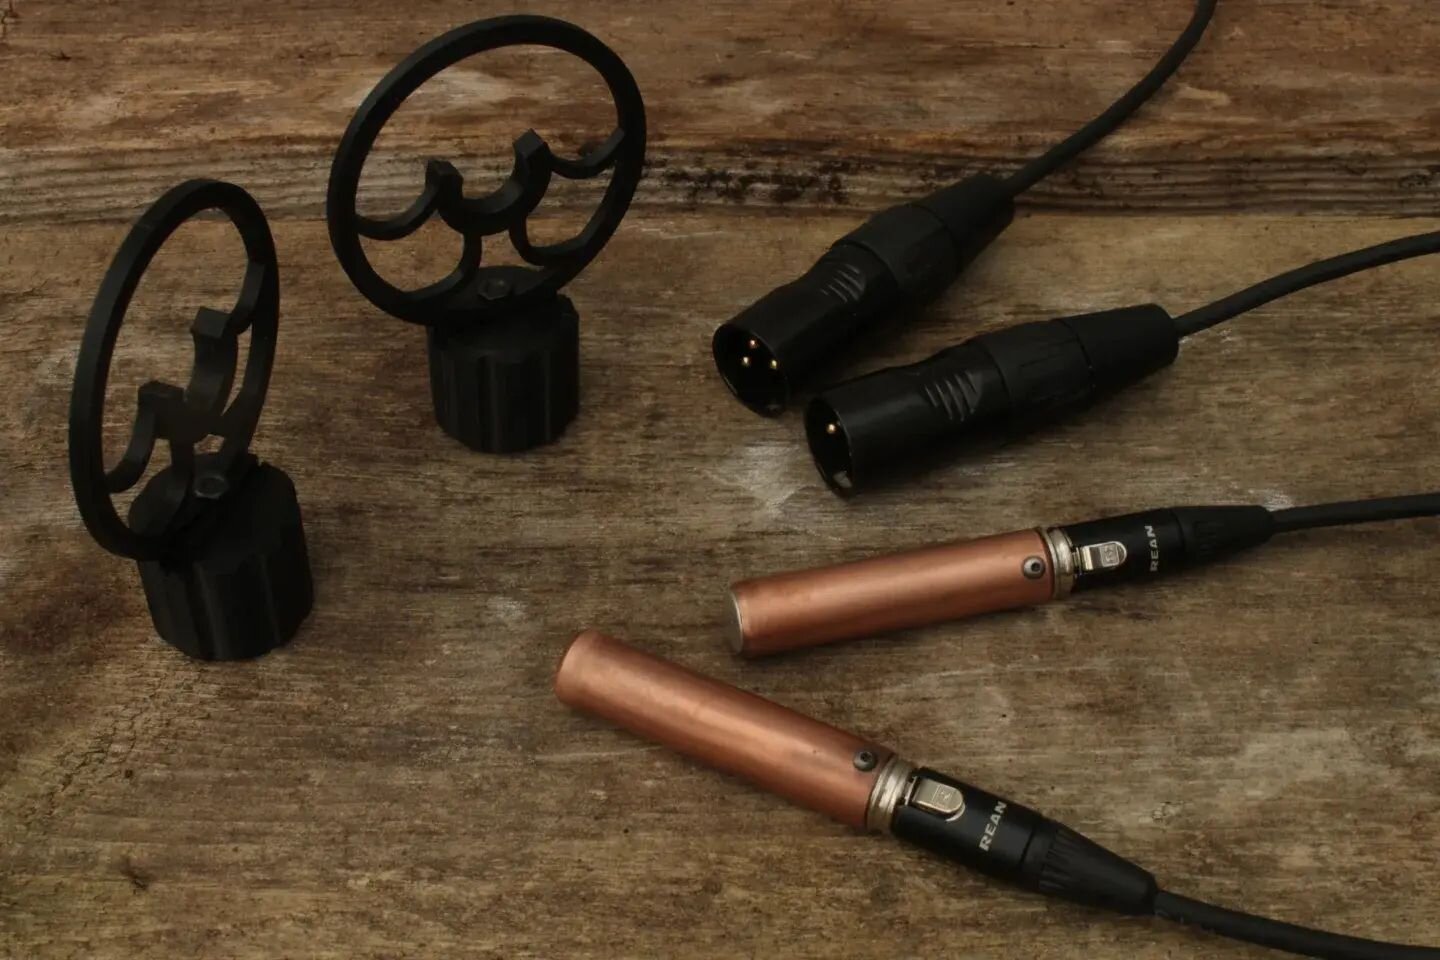 Verdi microphones are now available to purchase via the link in my bio. 

Looking forward to hearing what everyone will record with them. Its really exciting!

This is a very limited run and I'll be making more after the Christmas break.

Thanks for 